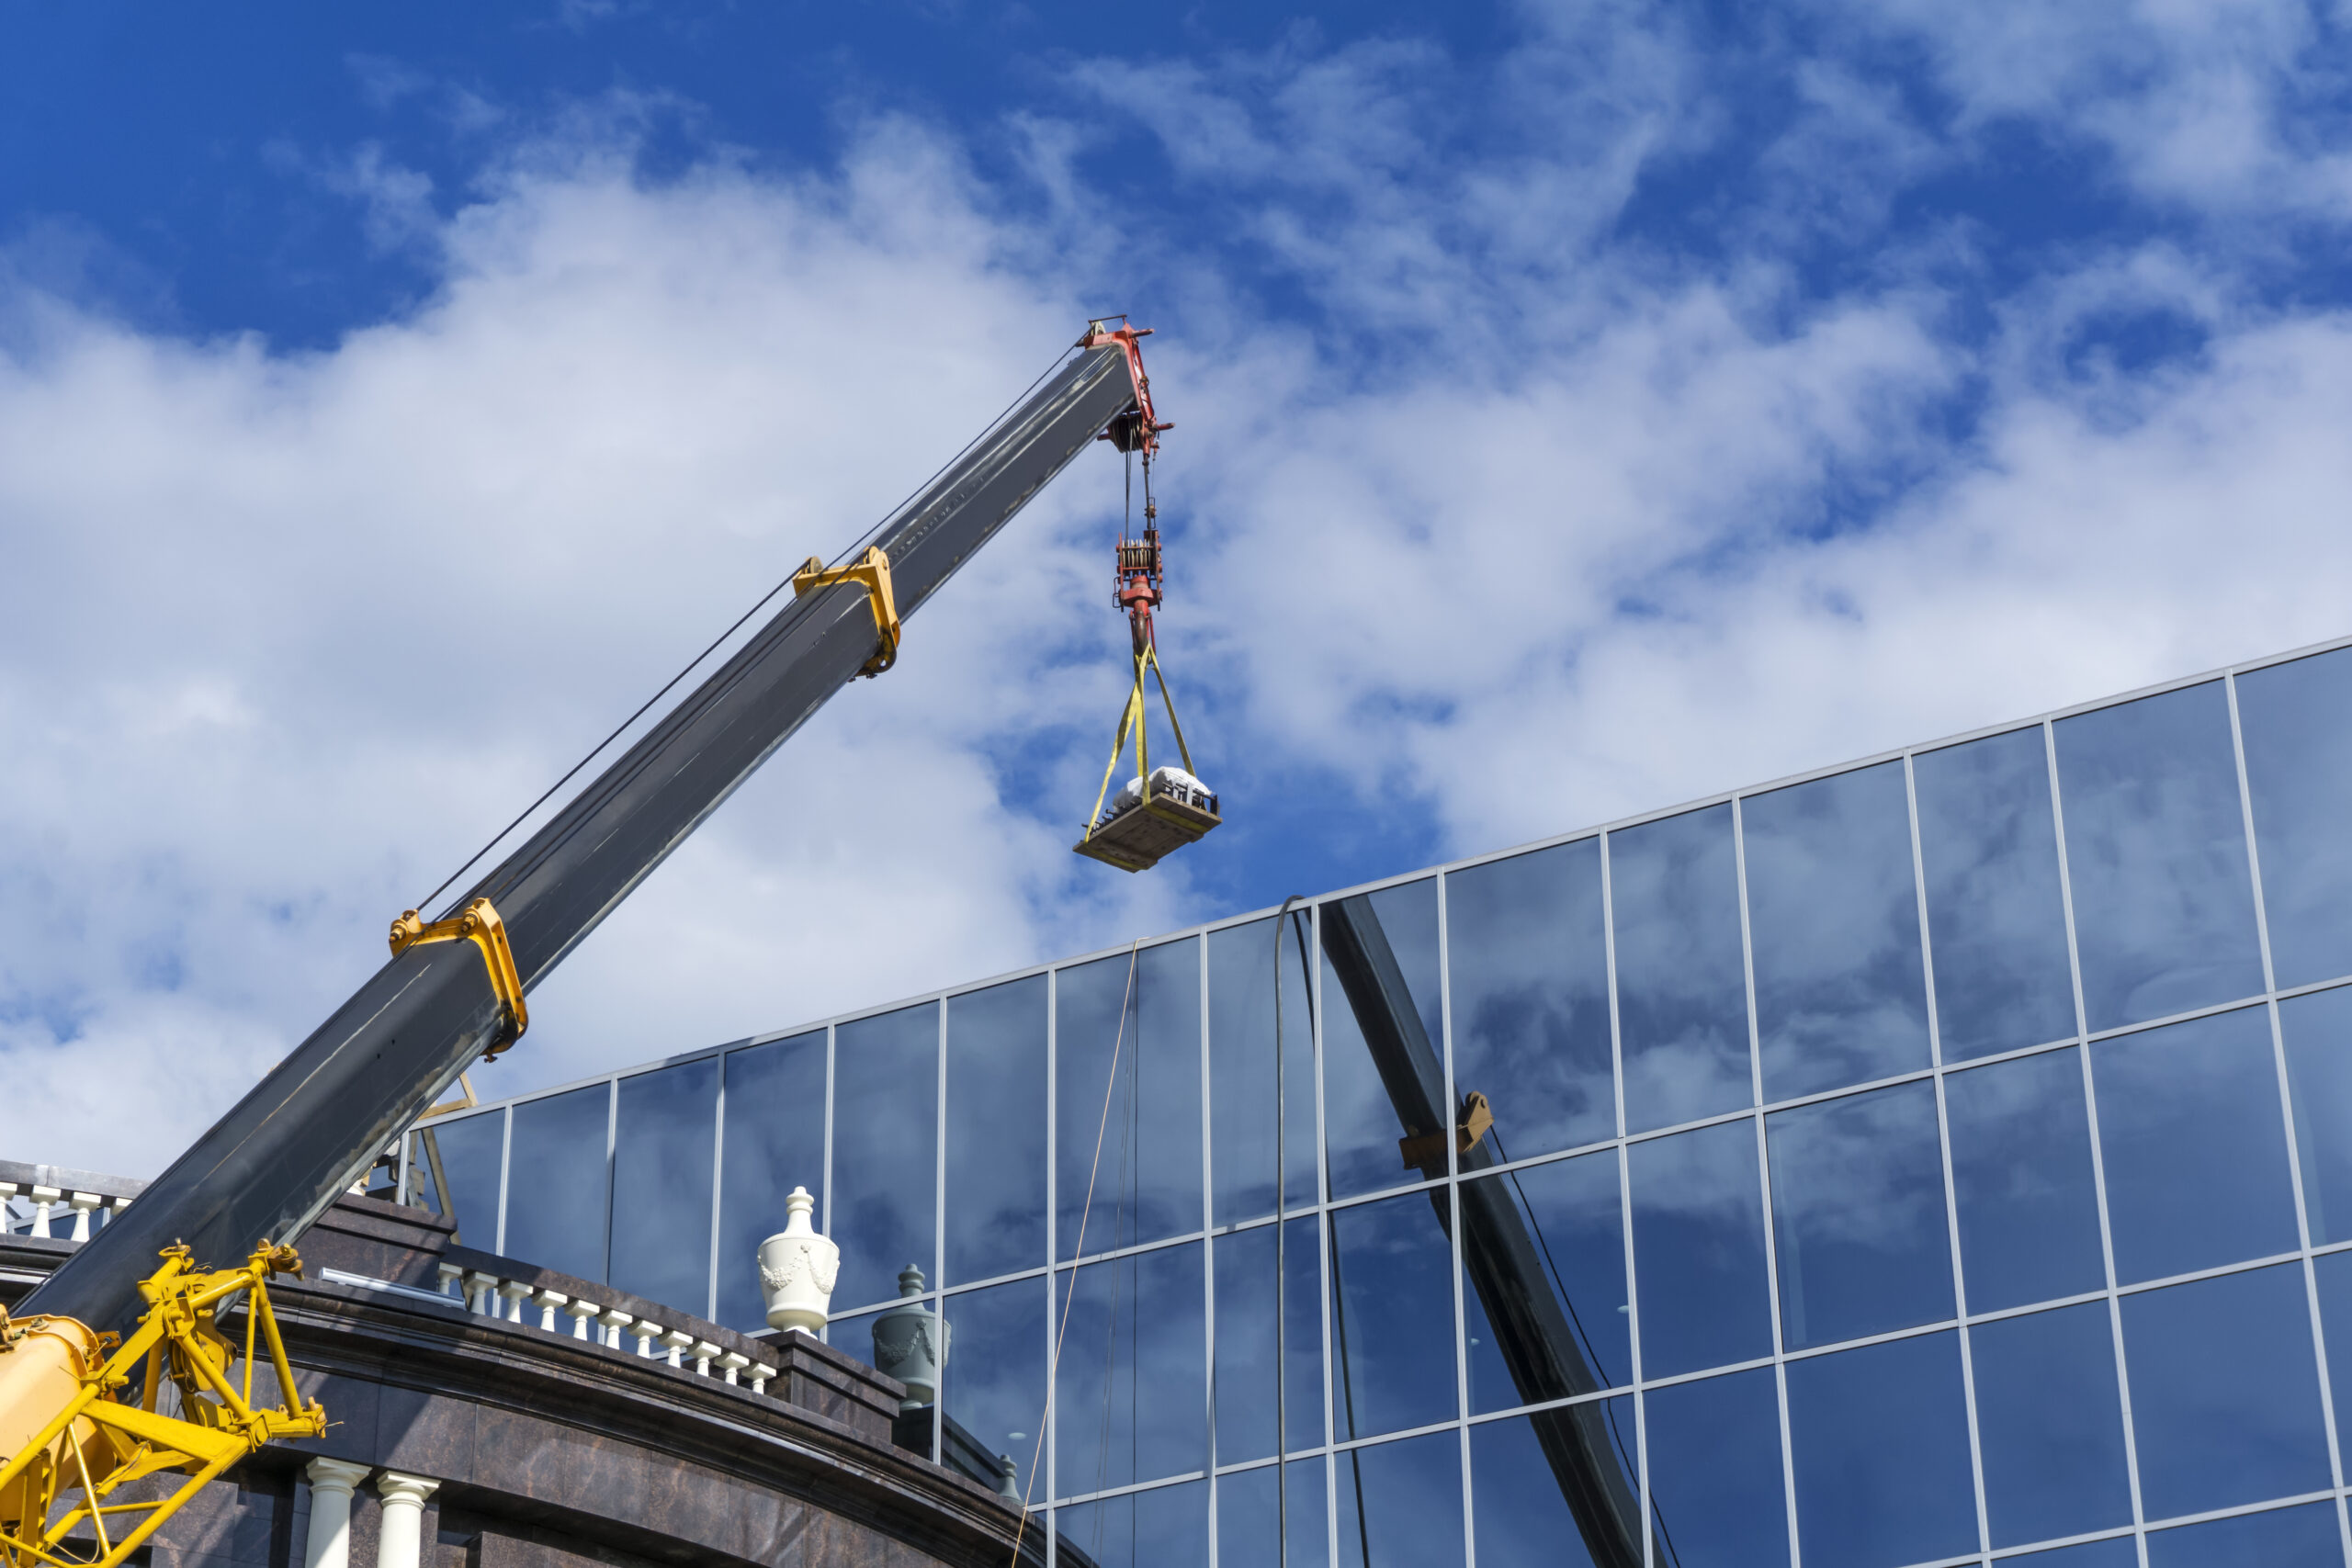 telescopic boom of a construction crane lifts the load against the mirror wall of the building reflecting the sky